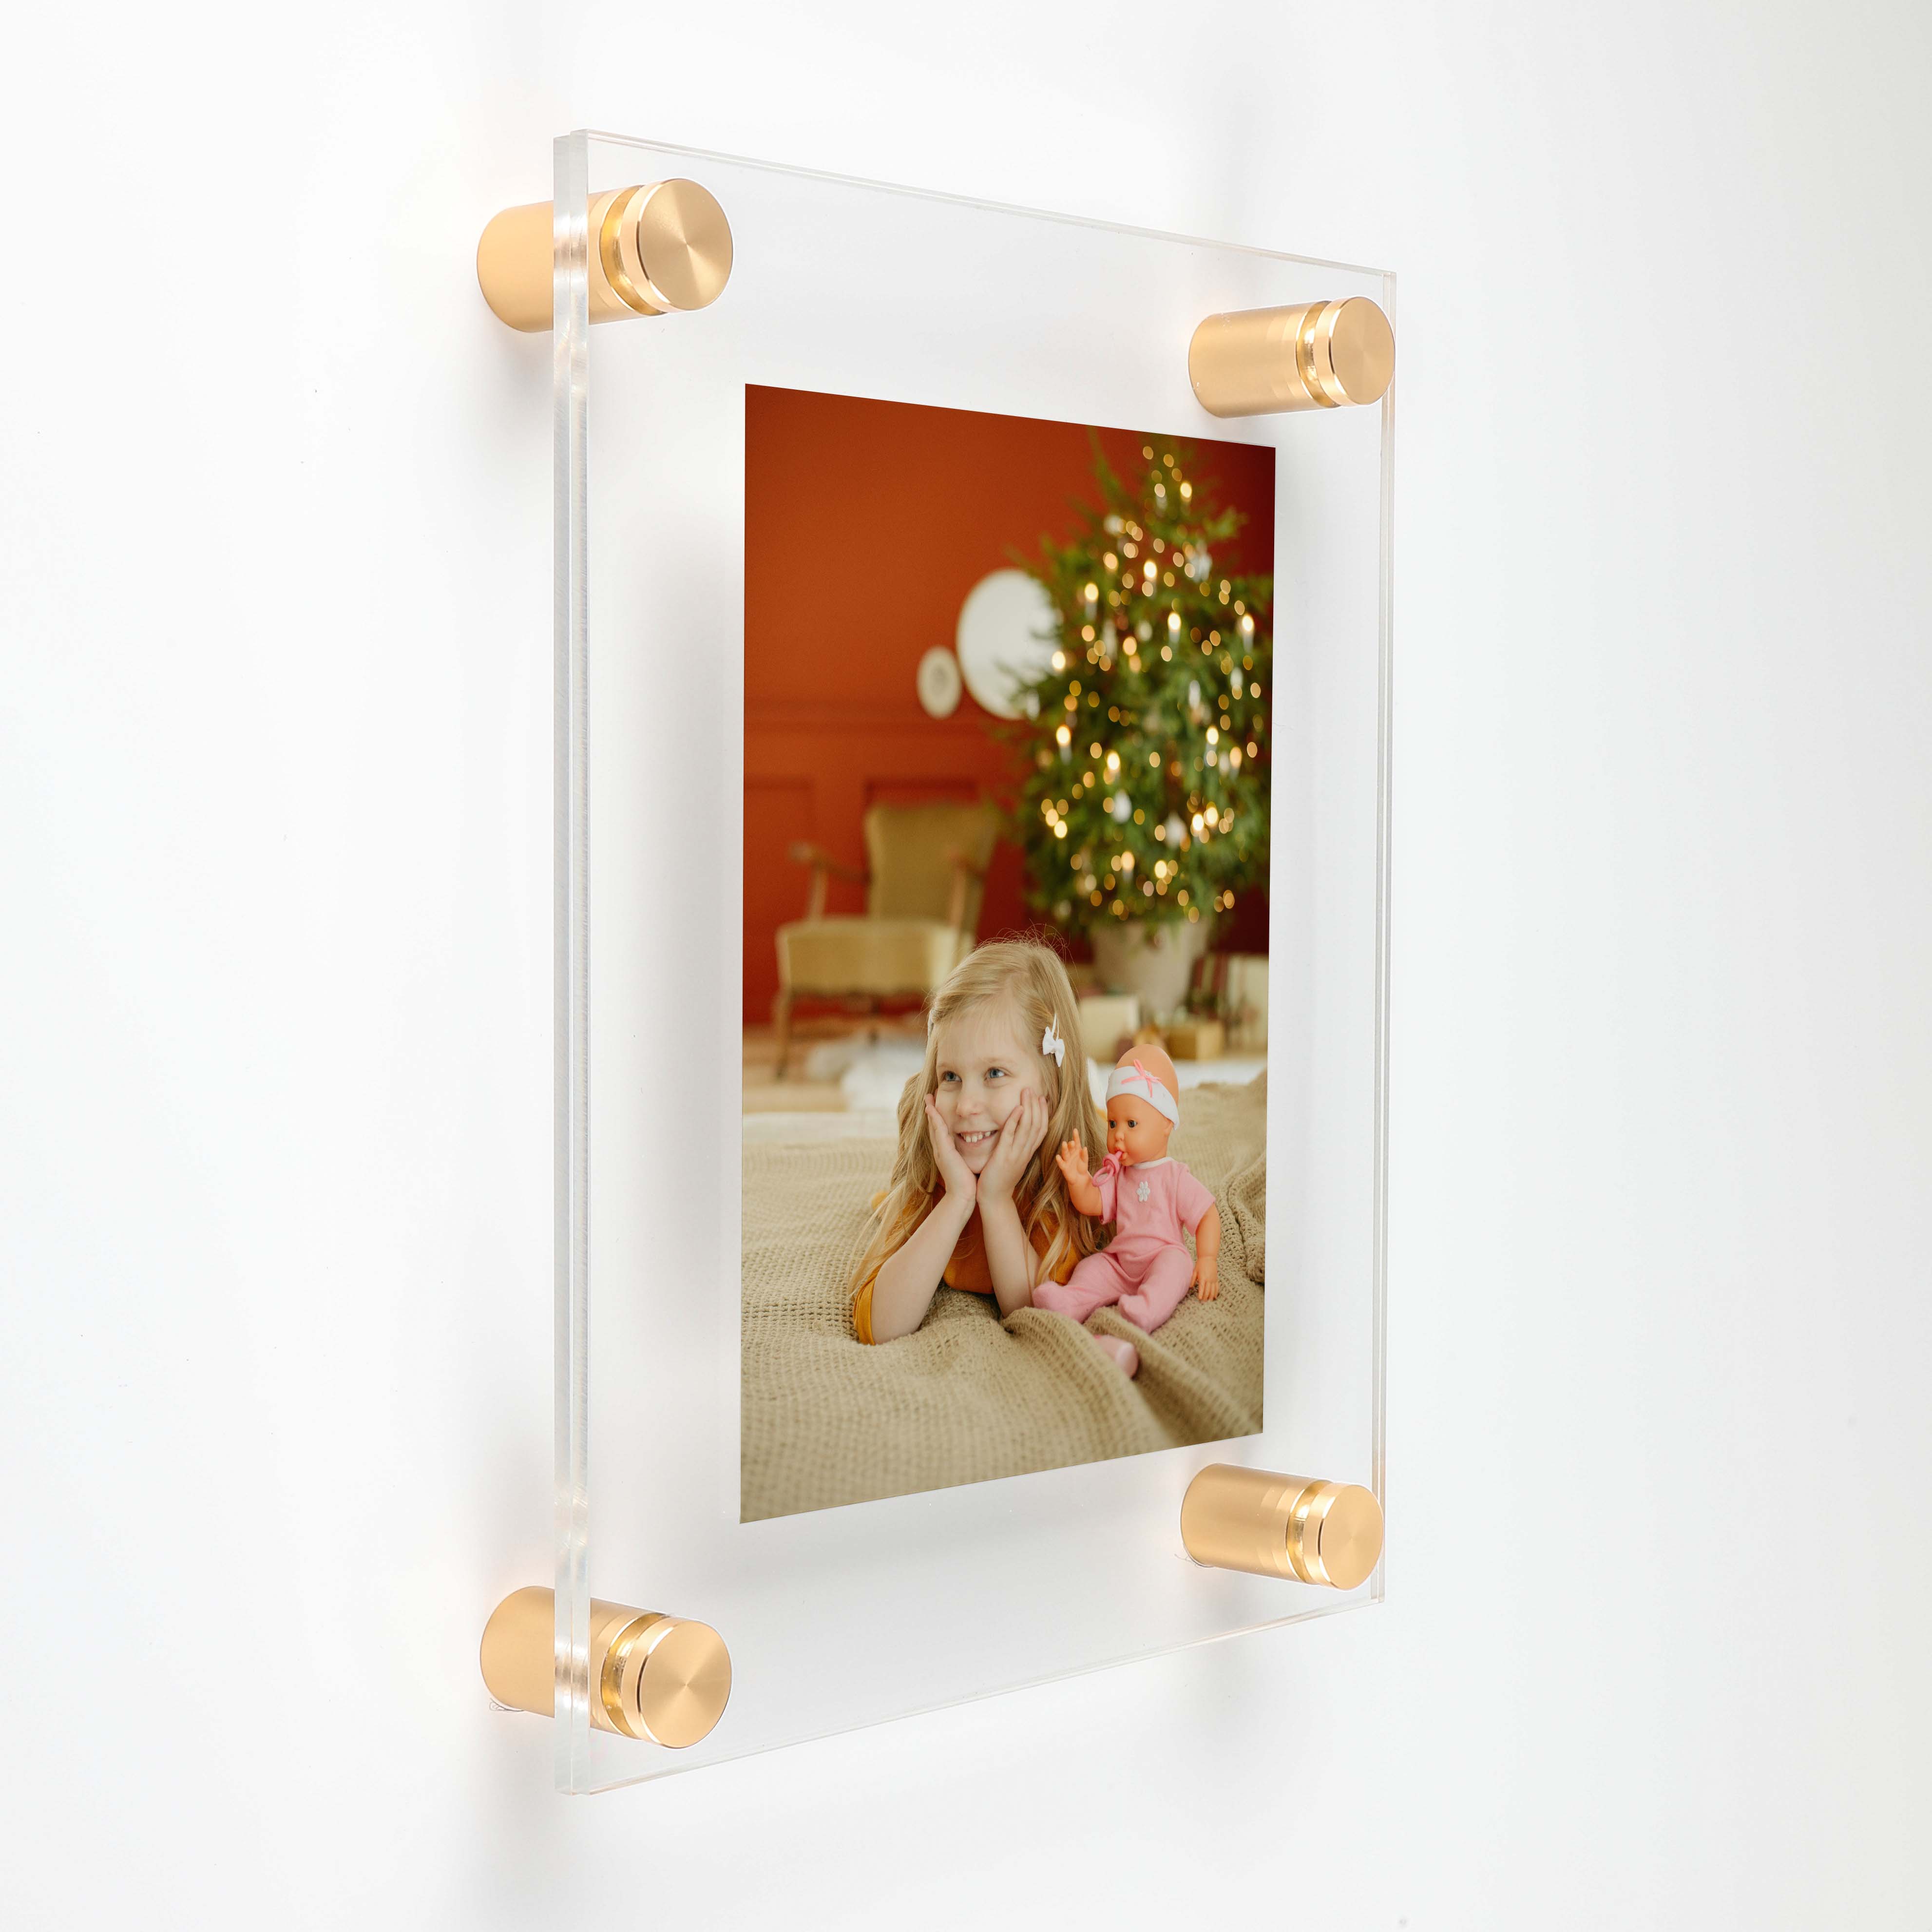 (2) 11'' x 13-1/2'' Clear Acrylics , Pre-Drilled With Polished Edges (Thick 1/8'' each), Wall Frame with (4) 5/8'' x 3/4'' Champagne Anodized Aluminum Standoffs includes Screws and Anchors